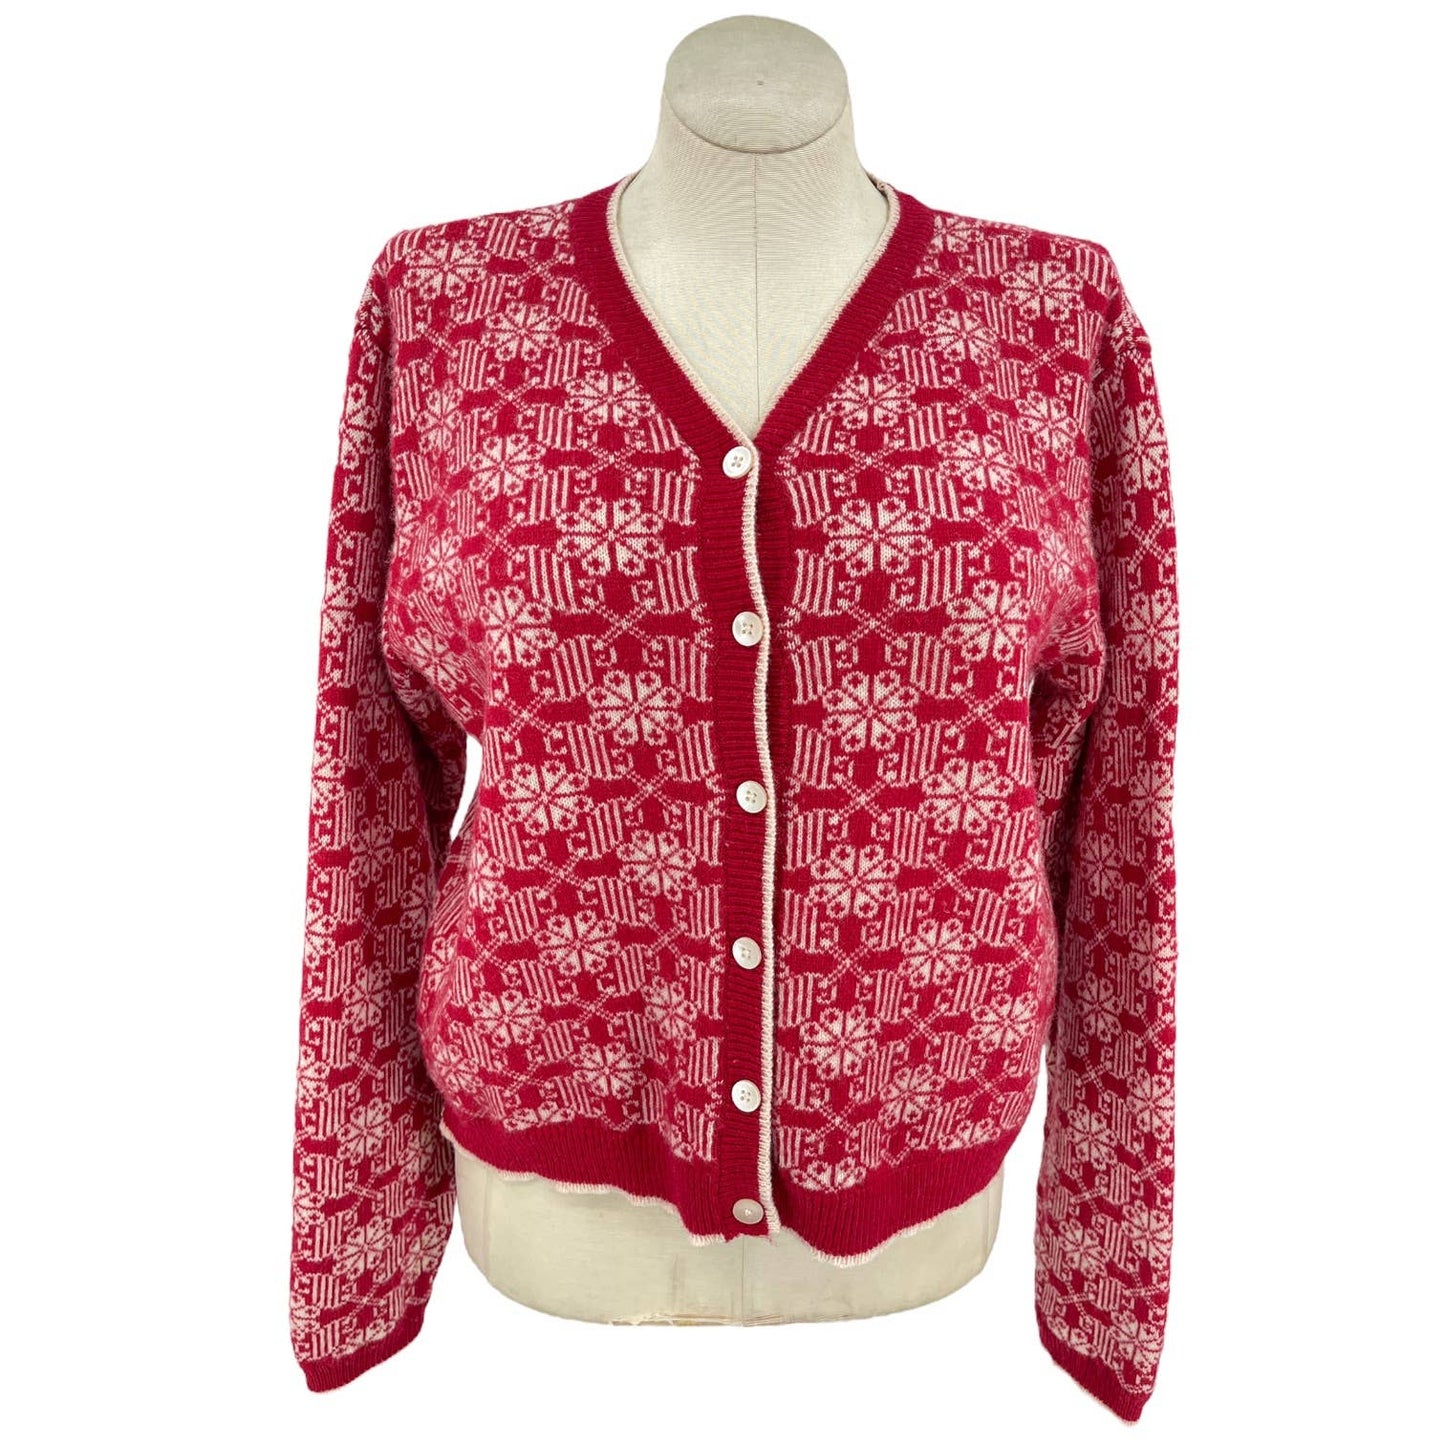 Vintage 90s Red and Cream Lambswool Cardigan Sweater Winter Gap Size L